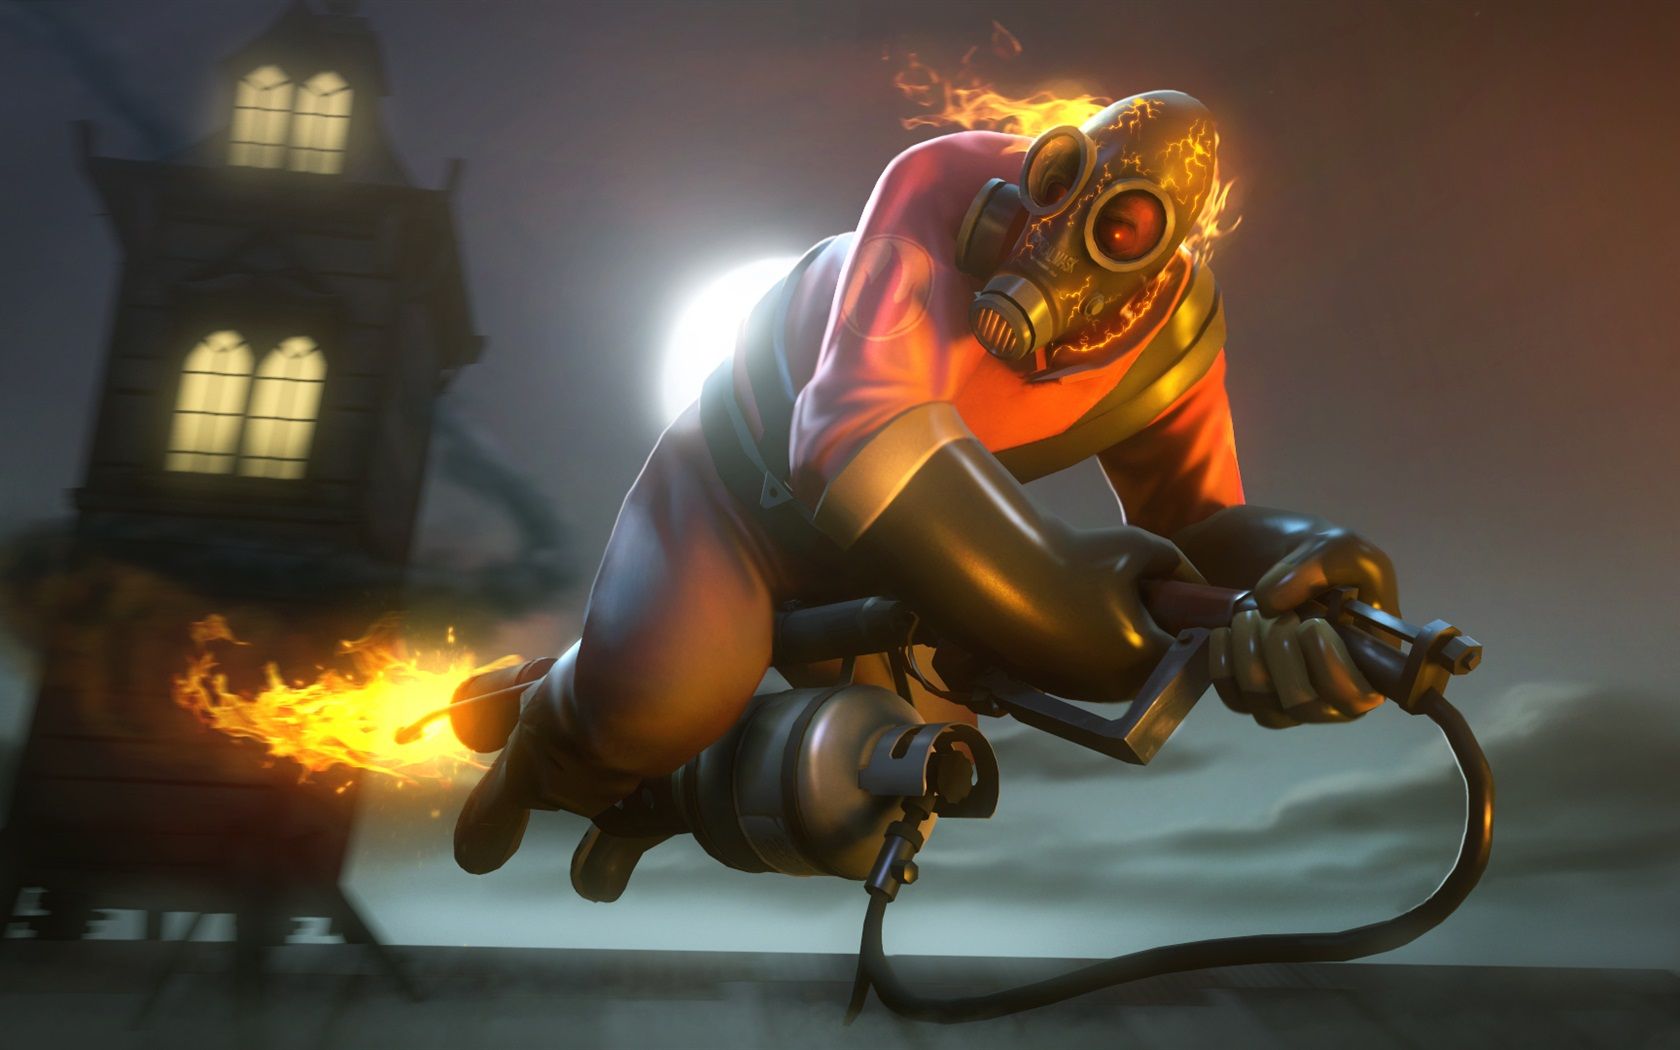 Wallpaper Team Fortress flamethrower 1920x1080 Full HD 2K Picture, Image